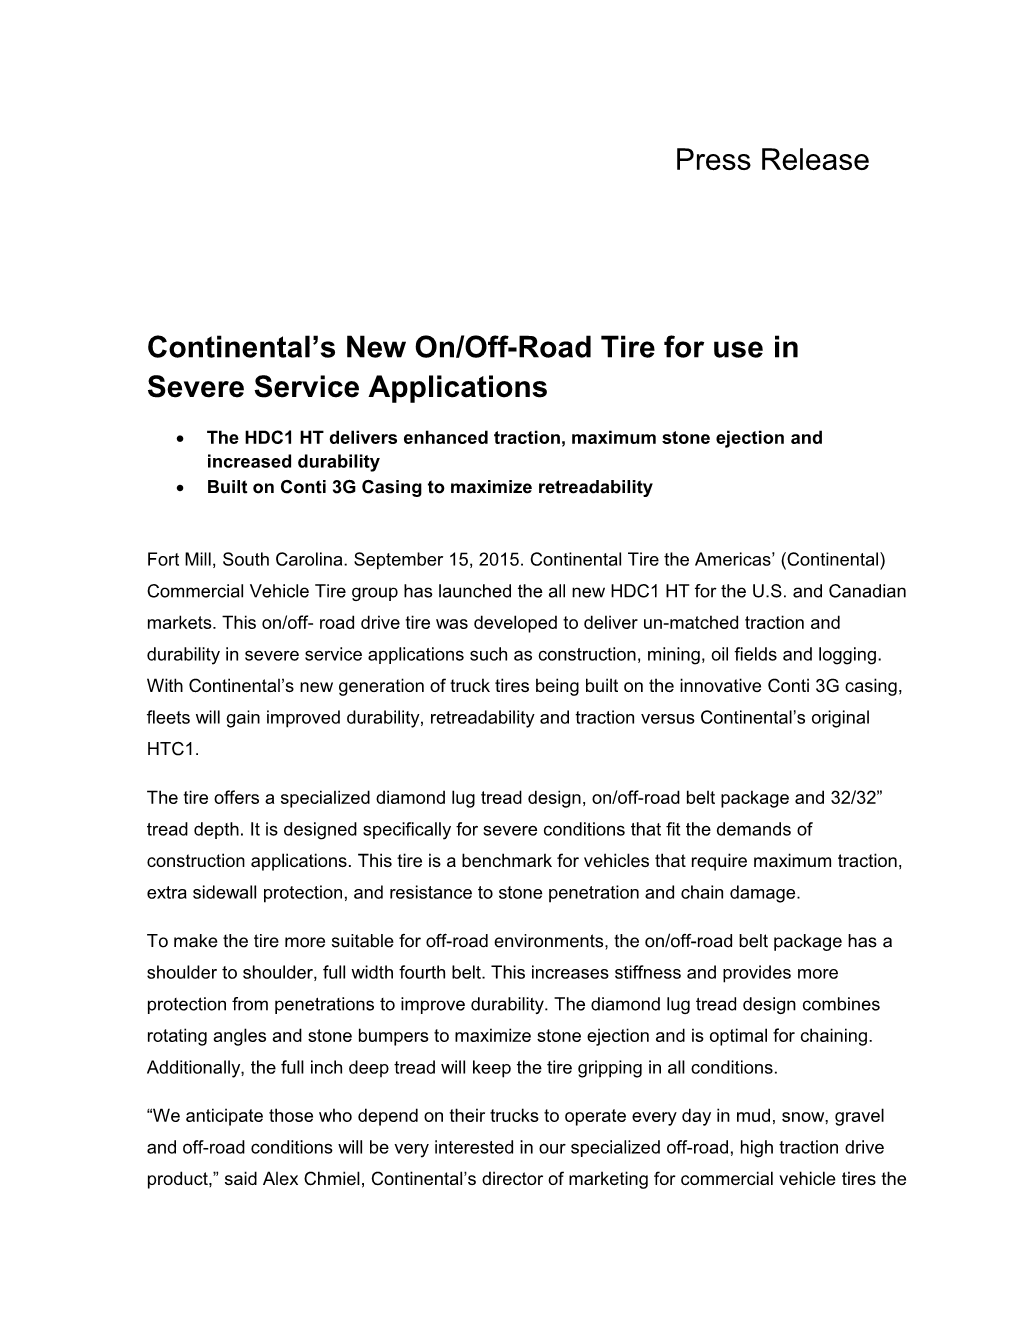 Continental S New On/Off-Road Tire for Usein Severe Serviceapplications